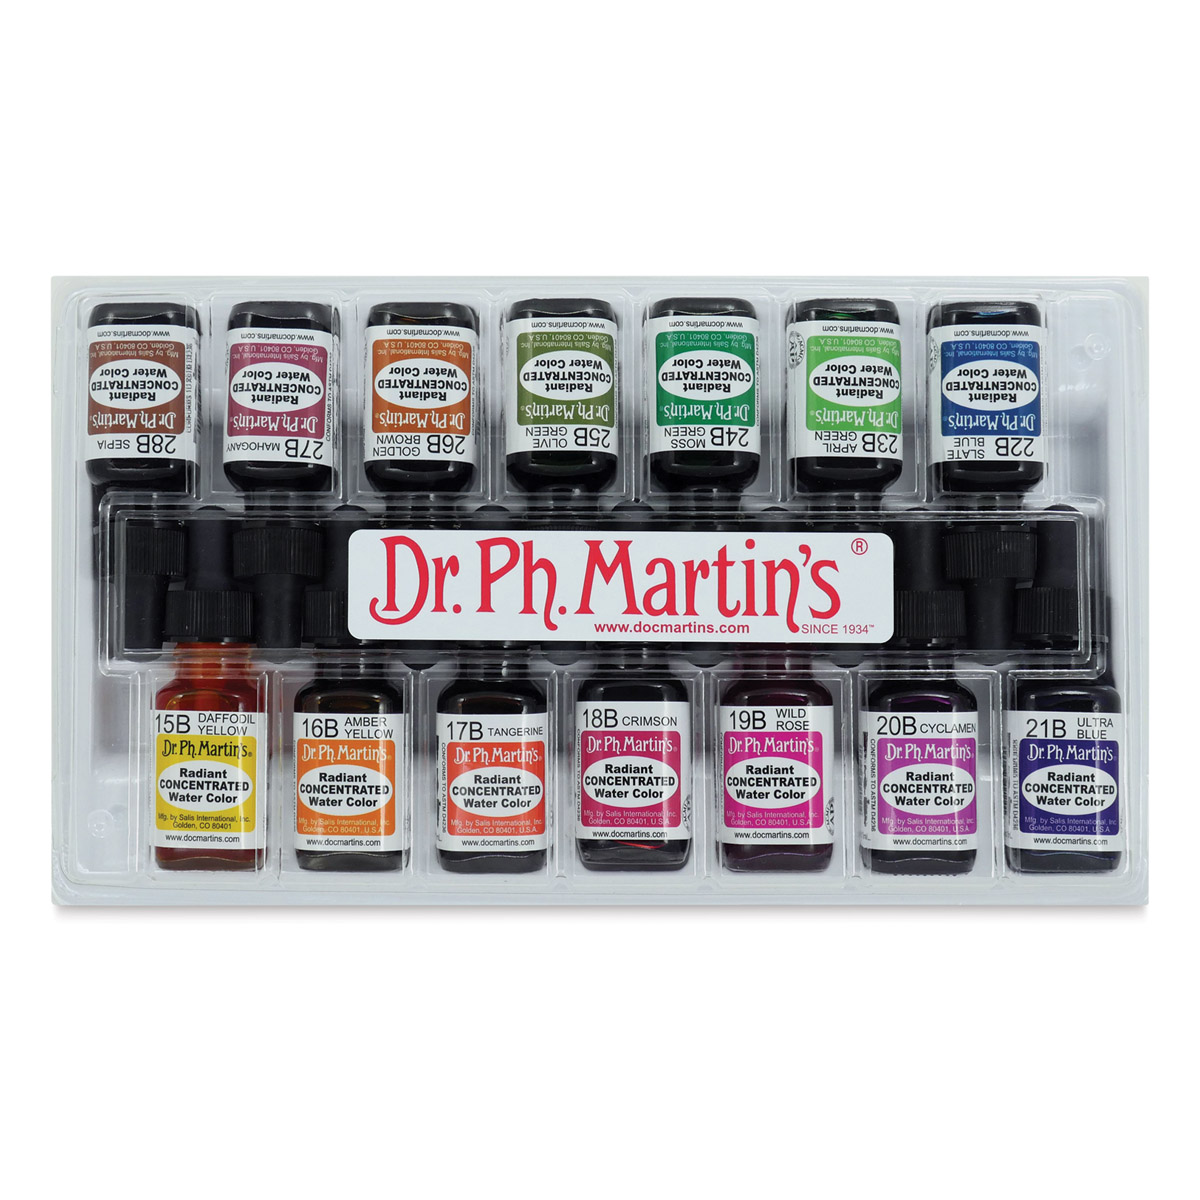 Dr. Ph. Martin's Radiant Concentrated Watercolors and Sets | BLICK ...